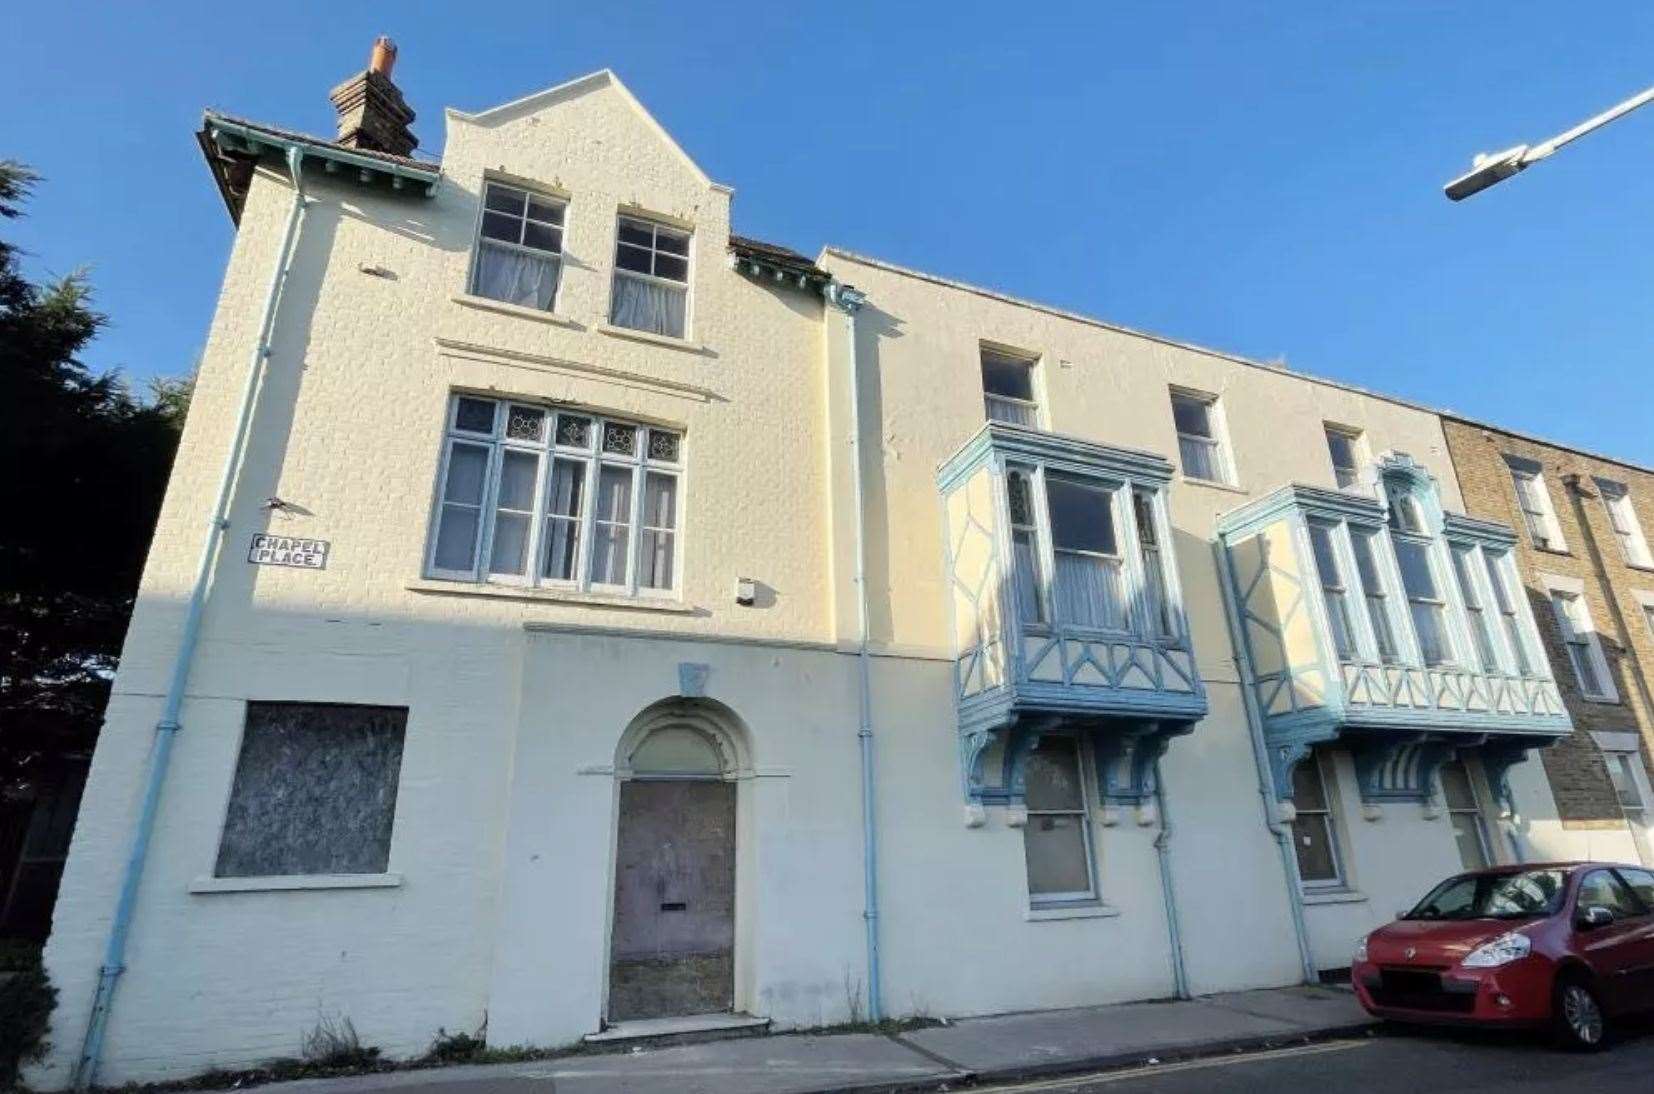 The former vicarage in Ramsgate dates back to the 18th century. Picture: Clive Emson Auctioneers